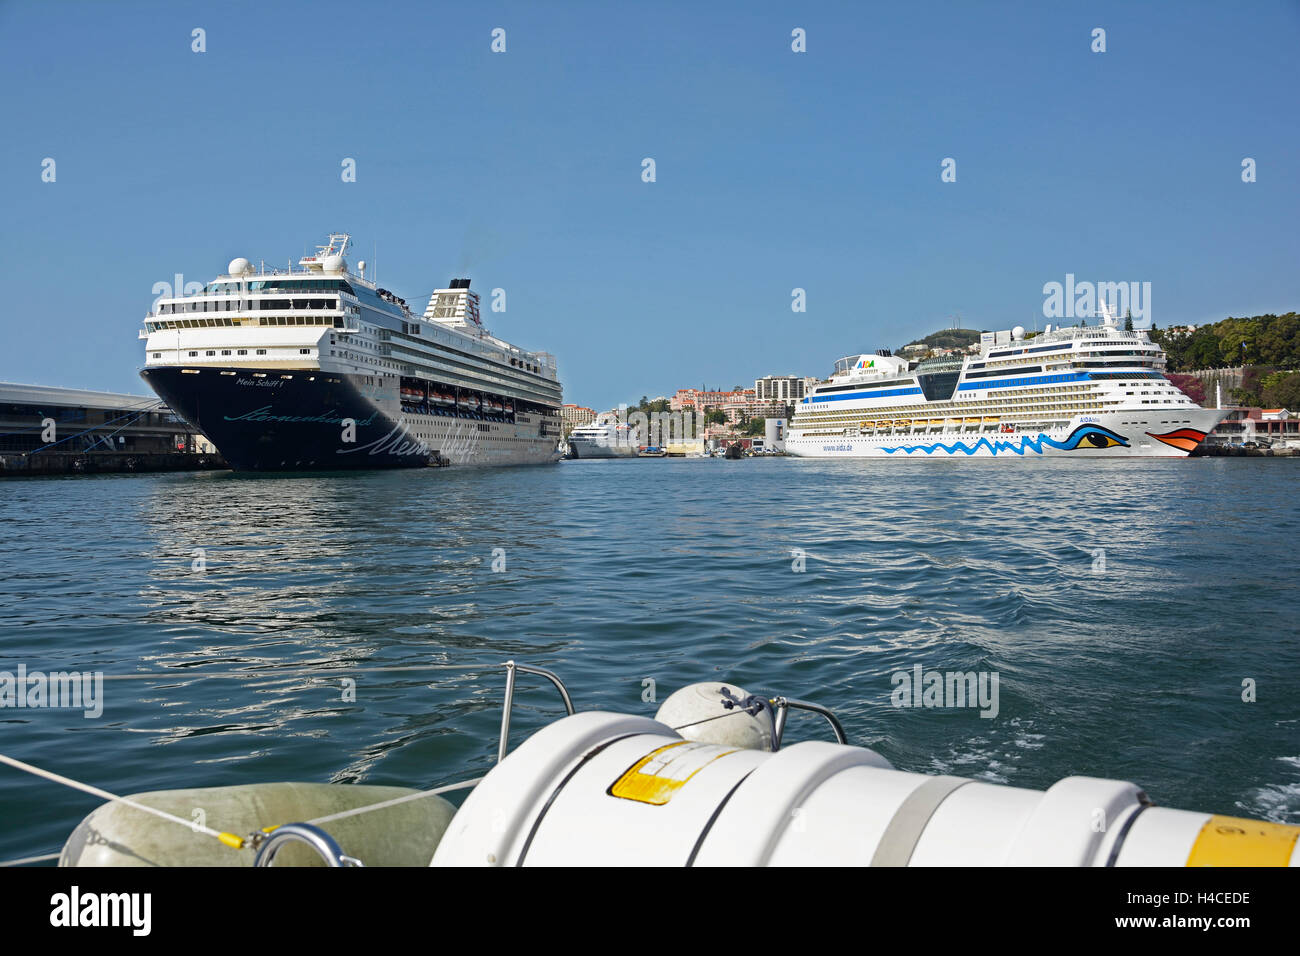 Cruise ships 'AIDA blue 'and' my ship 1' in Funchal Stock Photo